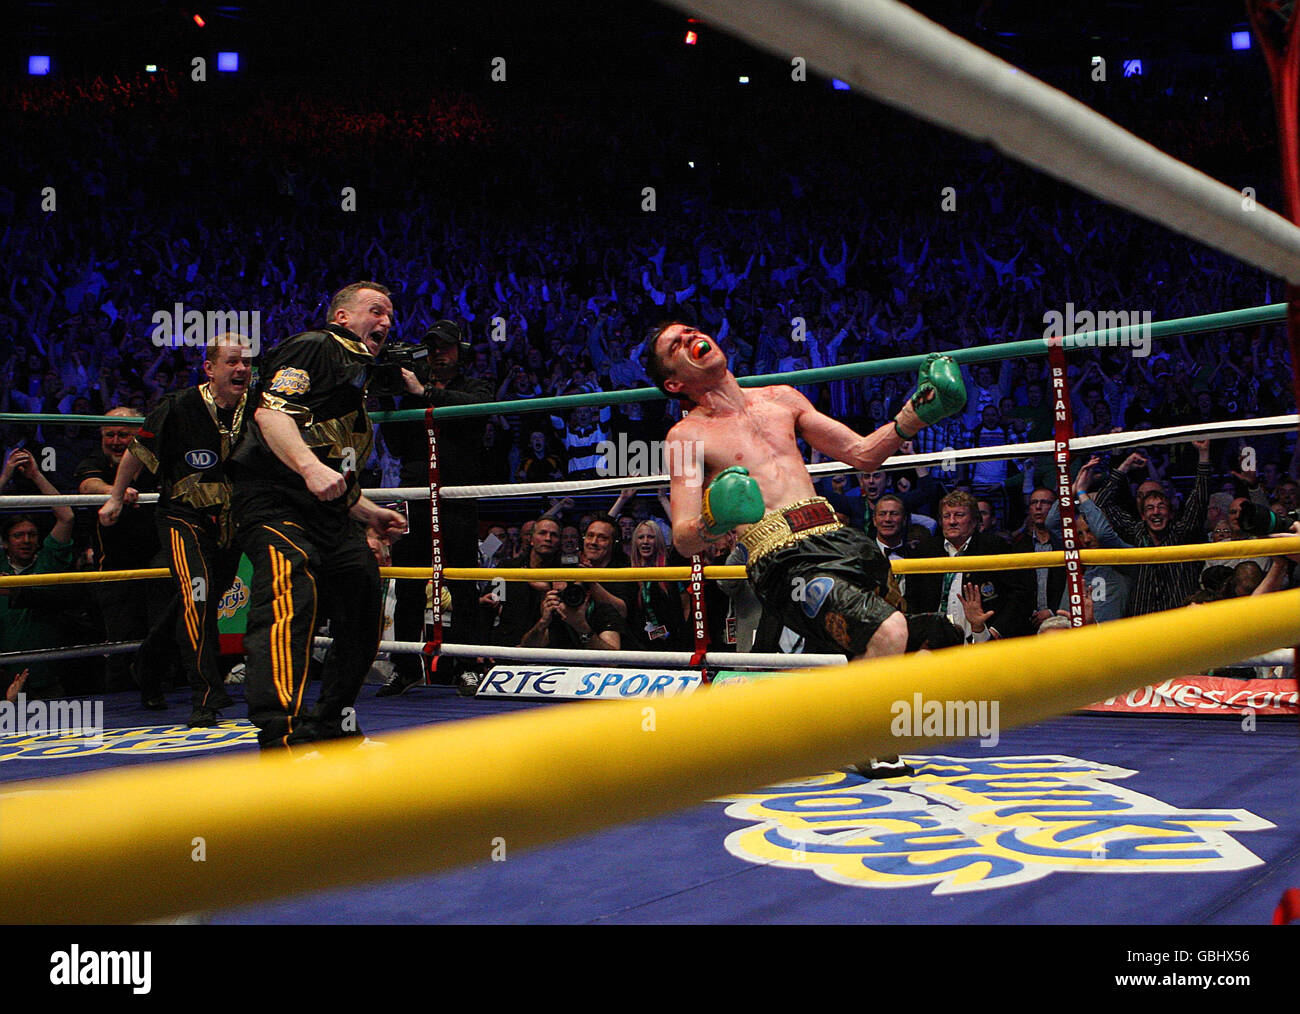 Bernard Dunne reacts after his victory with trainer Harry Hawkins and Promoter Brian Peters during the WBA Super-bantamweight Title bout at the O2 Arena in Dublin, Ireland. Stock Photo